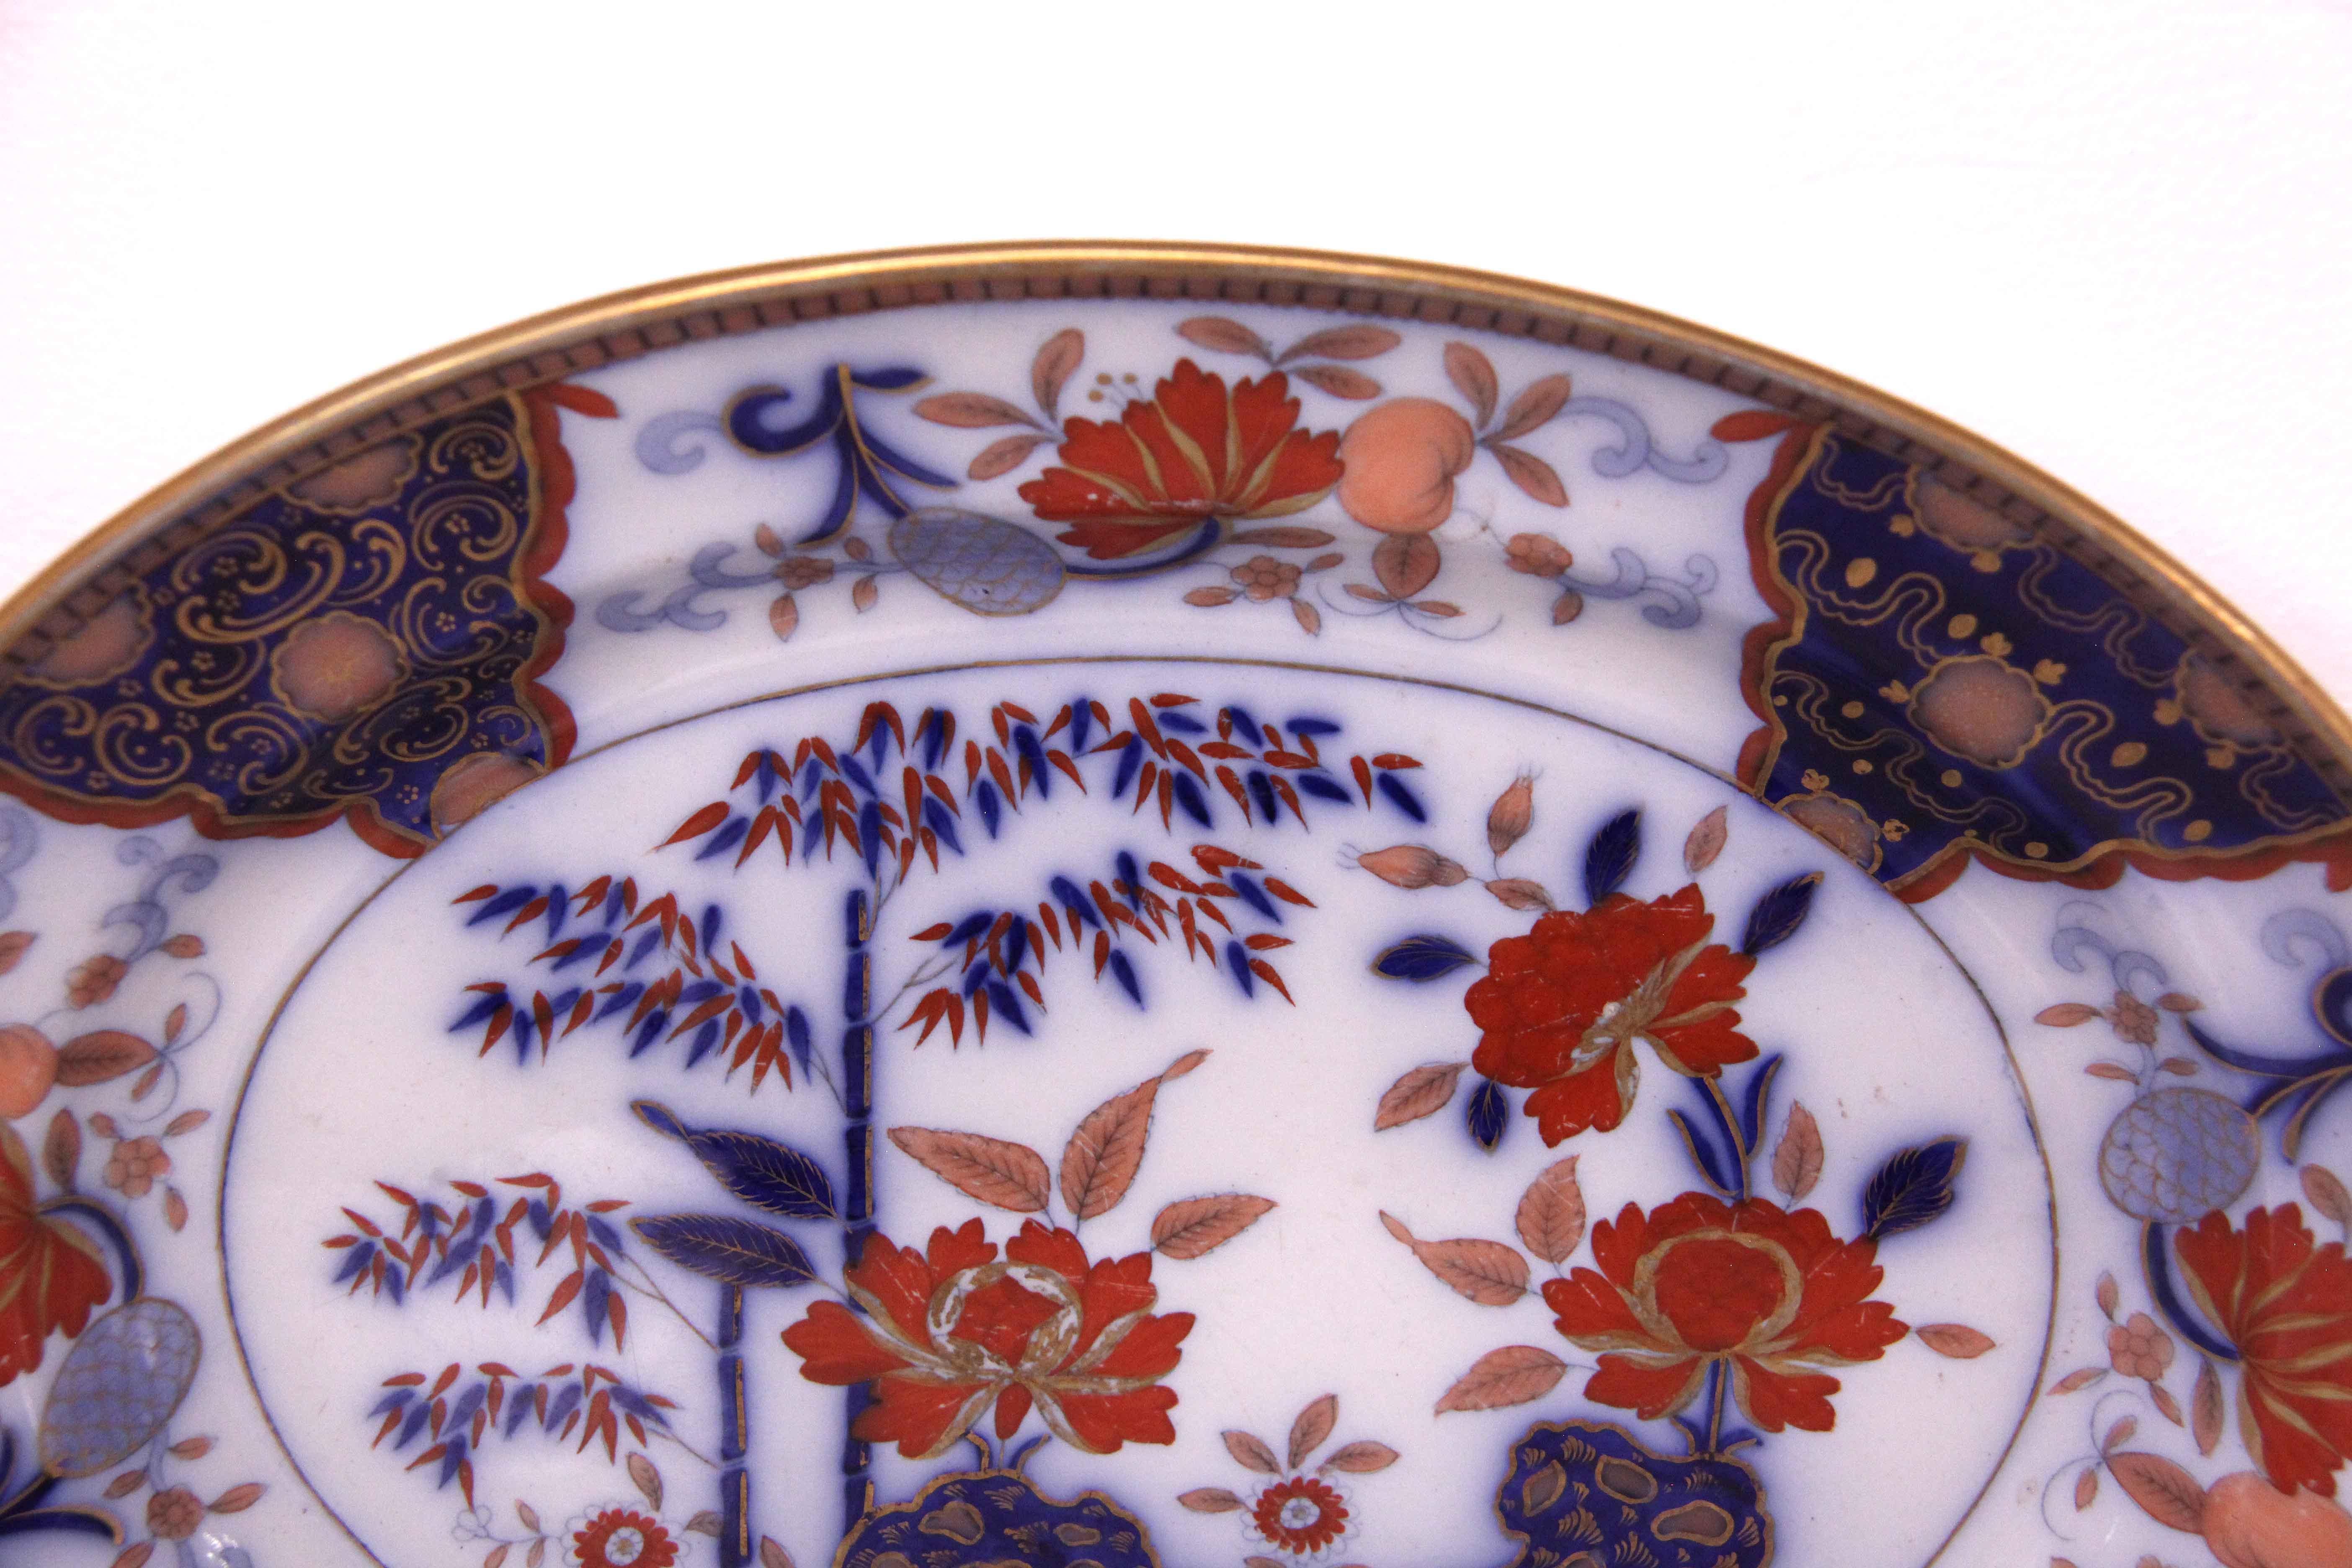 English Davenport flow blue ironstone platter, with a gilded rim, the border is decorated with stylized flowers and foliate, the interior of the platter has similar stylized flowers, foliate and bamboo stalks. There is gilding throughout the piece